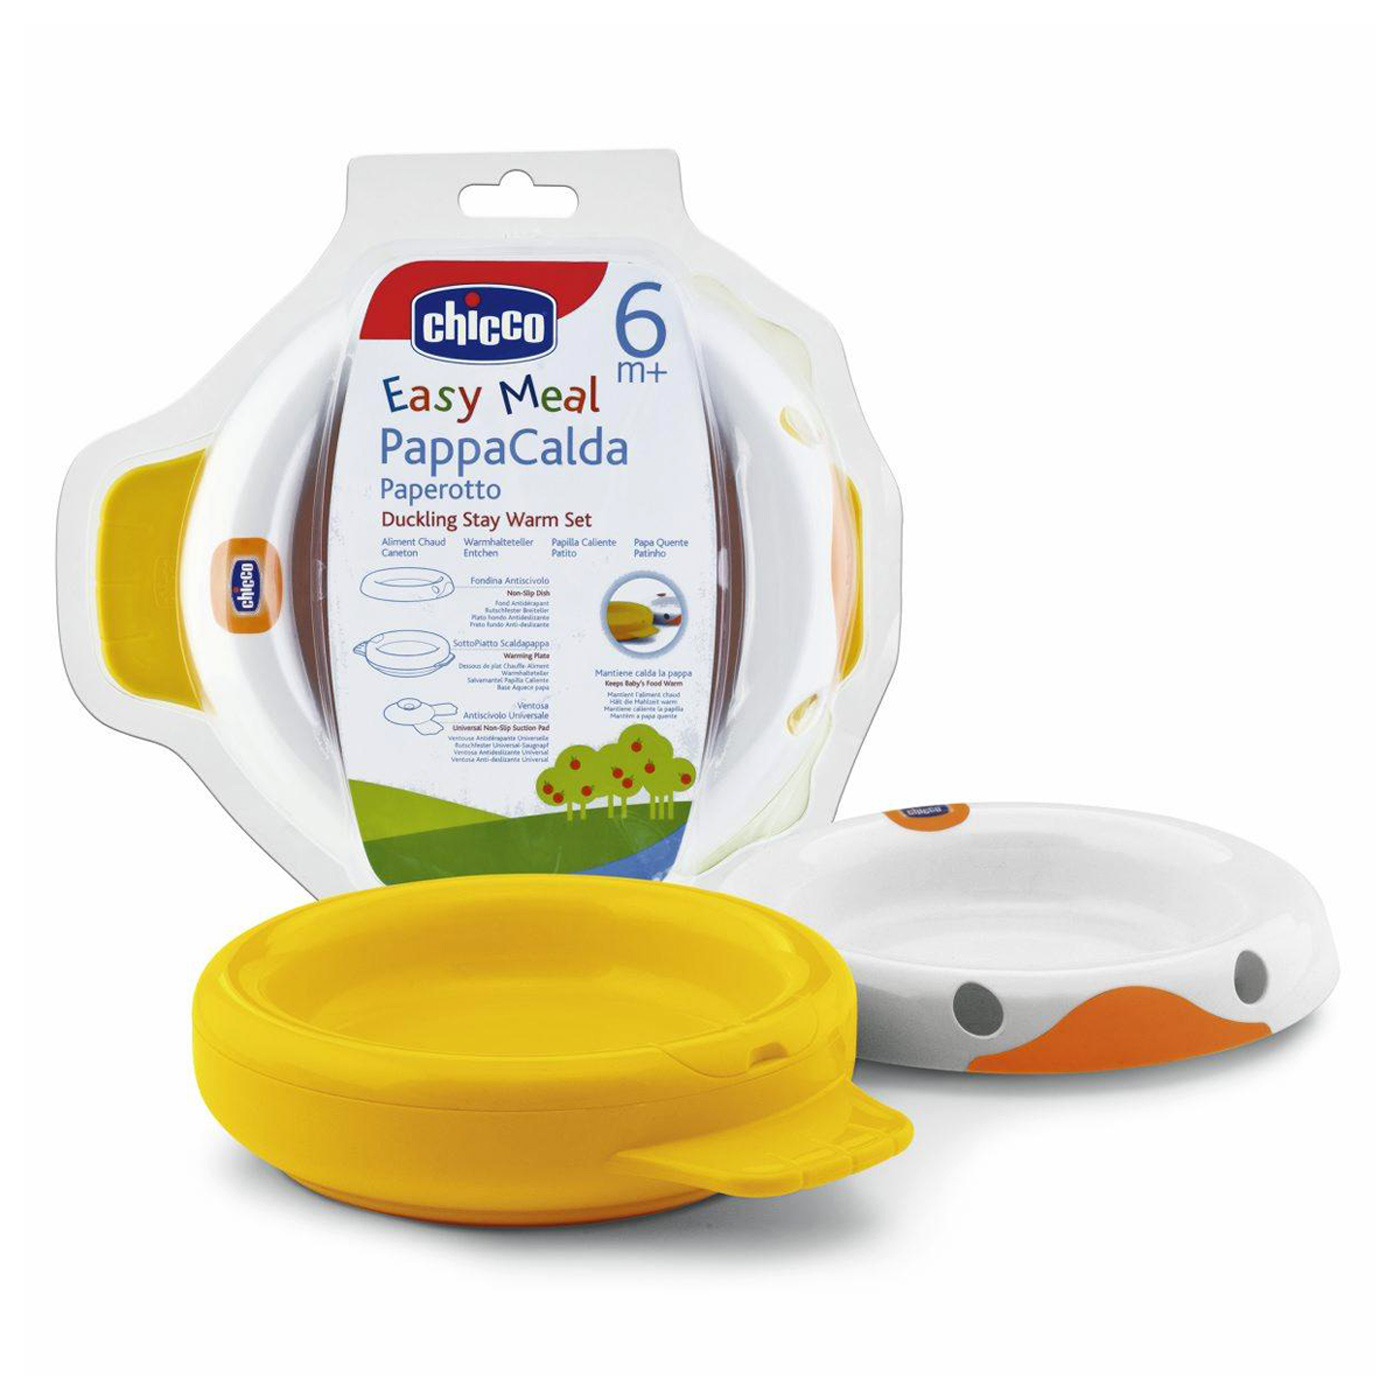 Chicco - Duckling Stay Warm Set